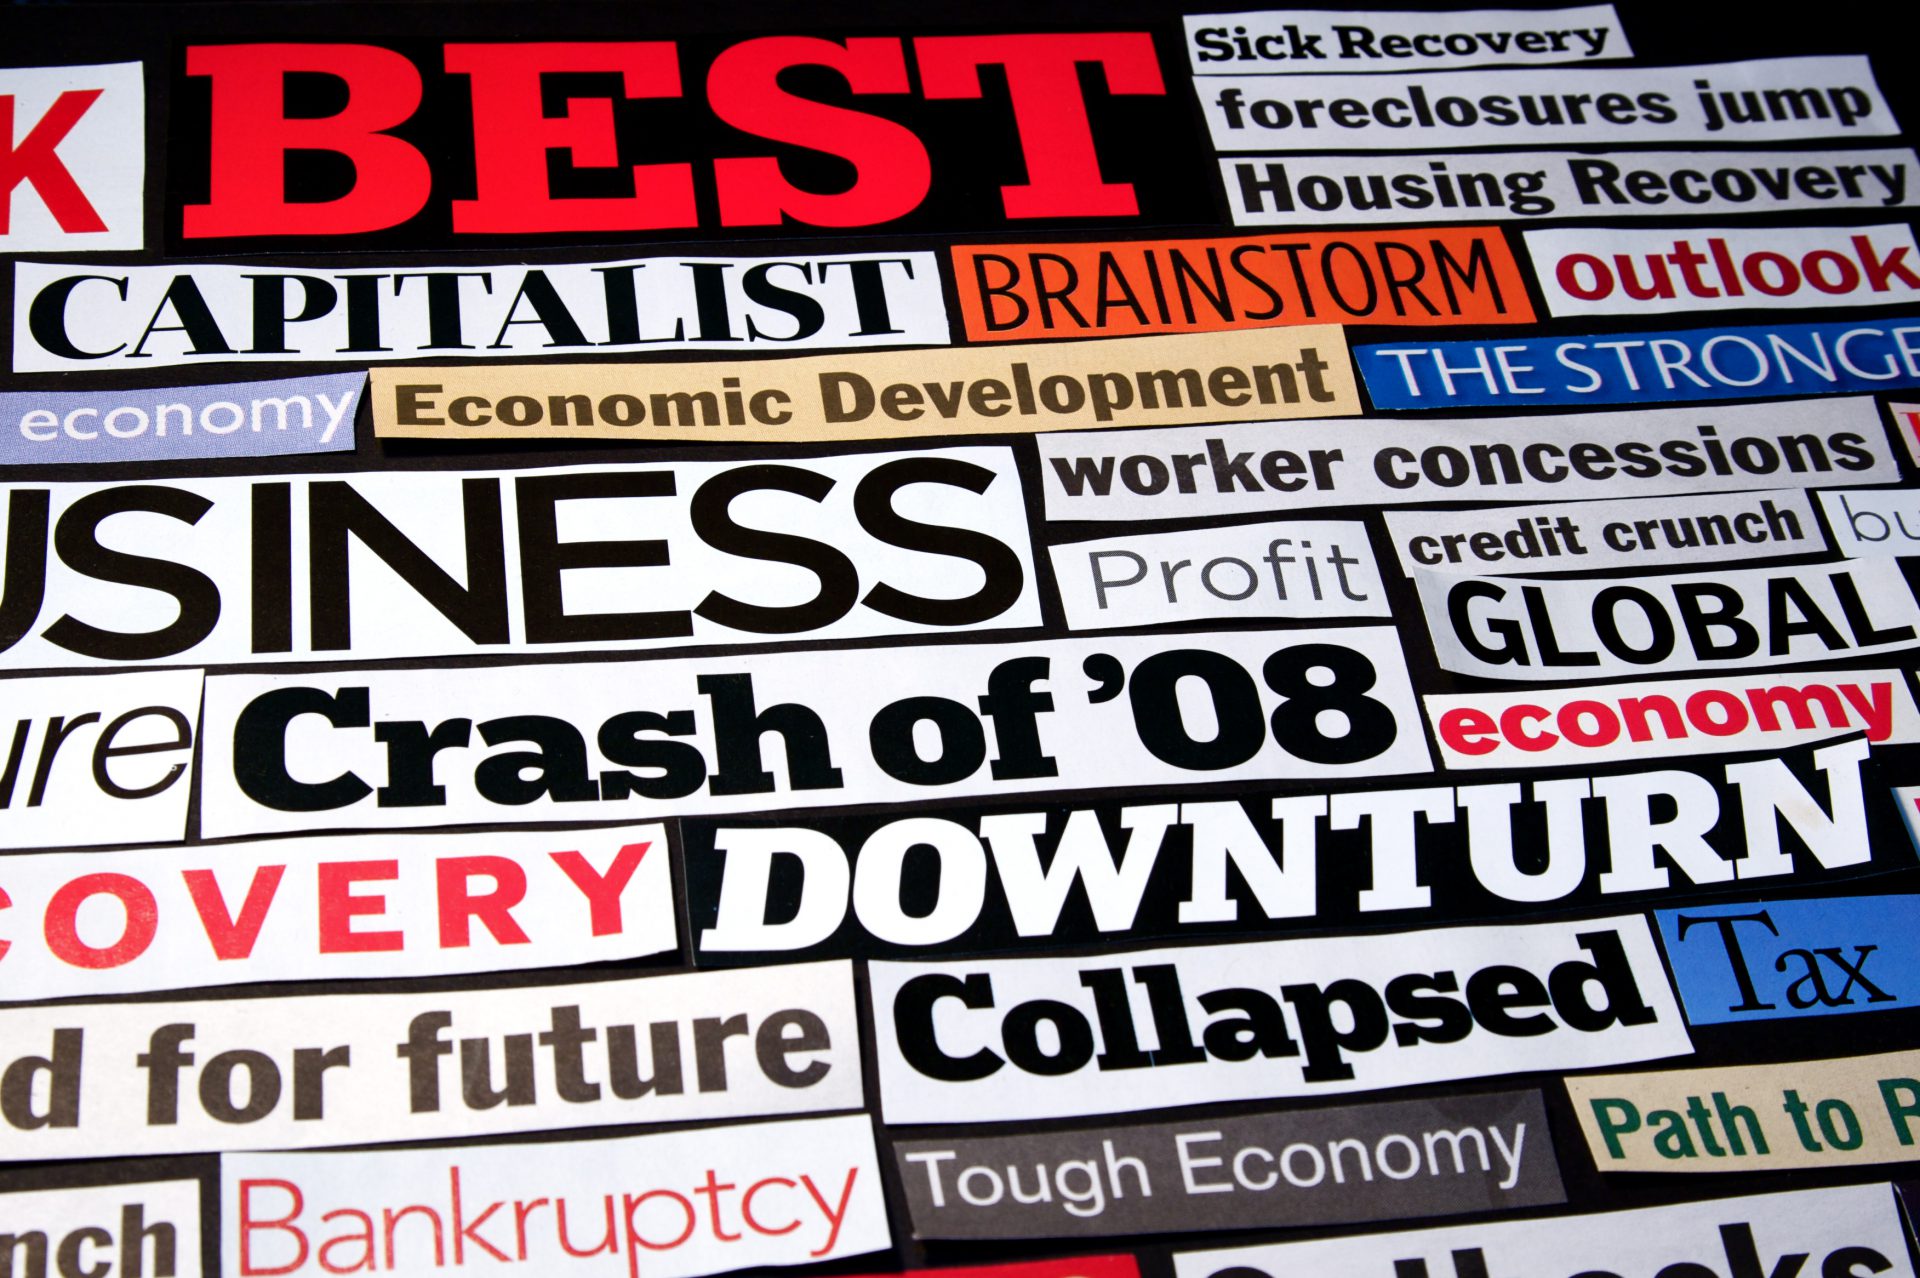 Newspaper and magazine headlines detailing the economic recession and recovery